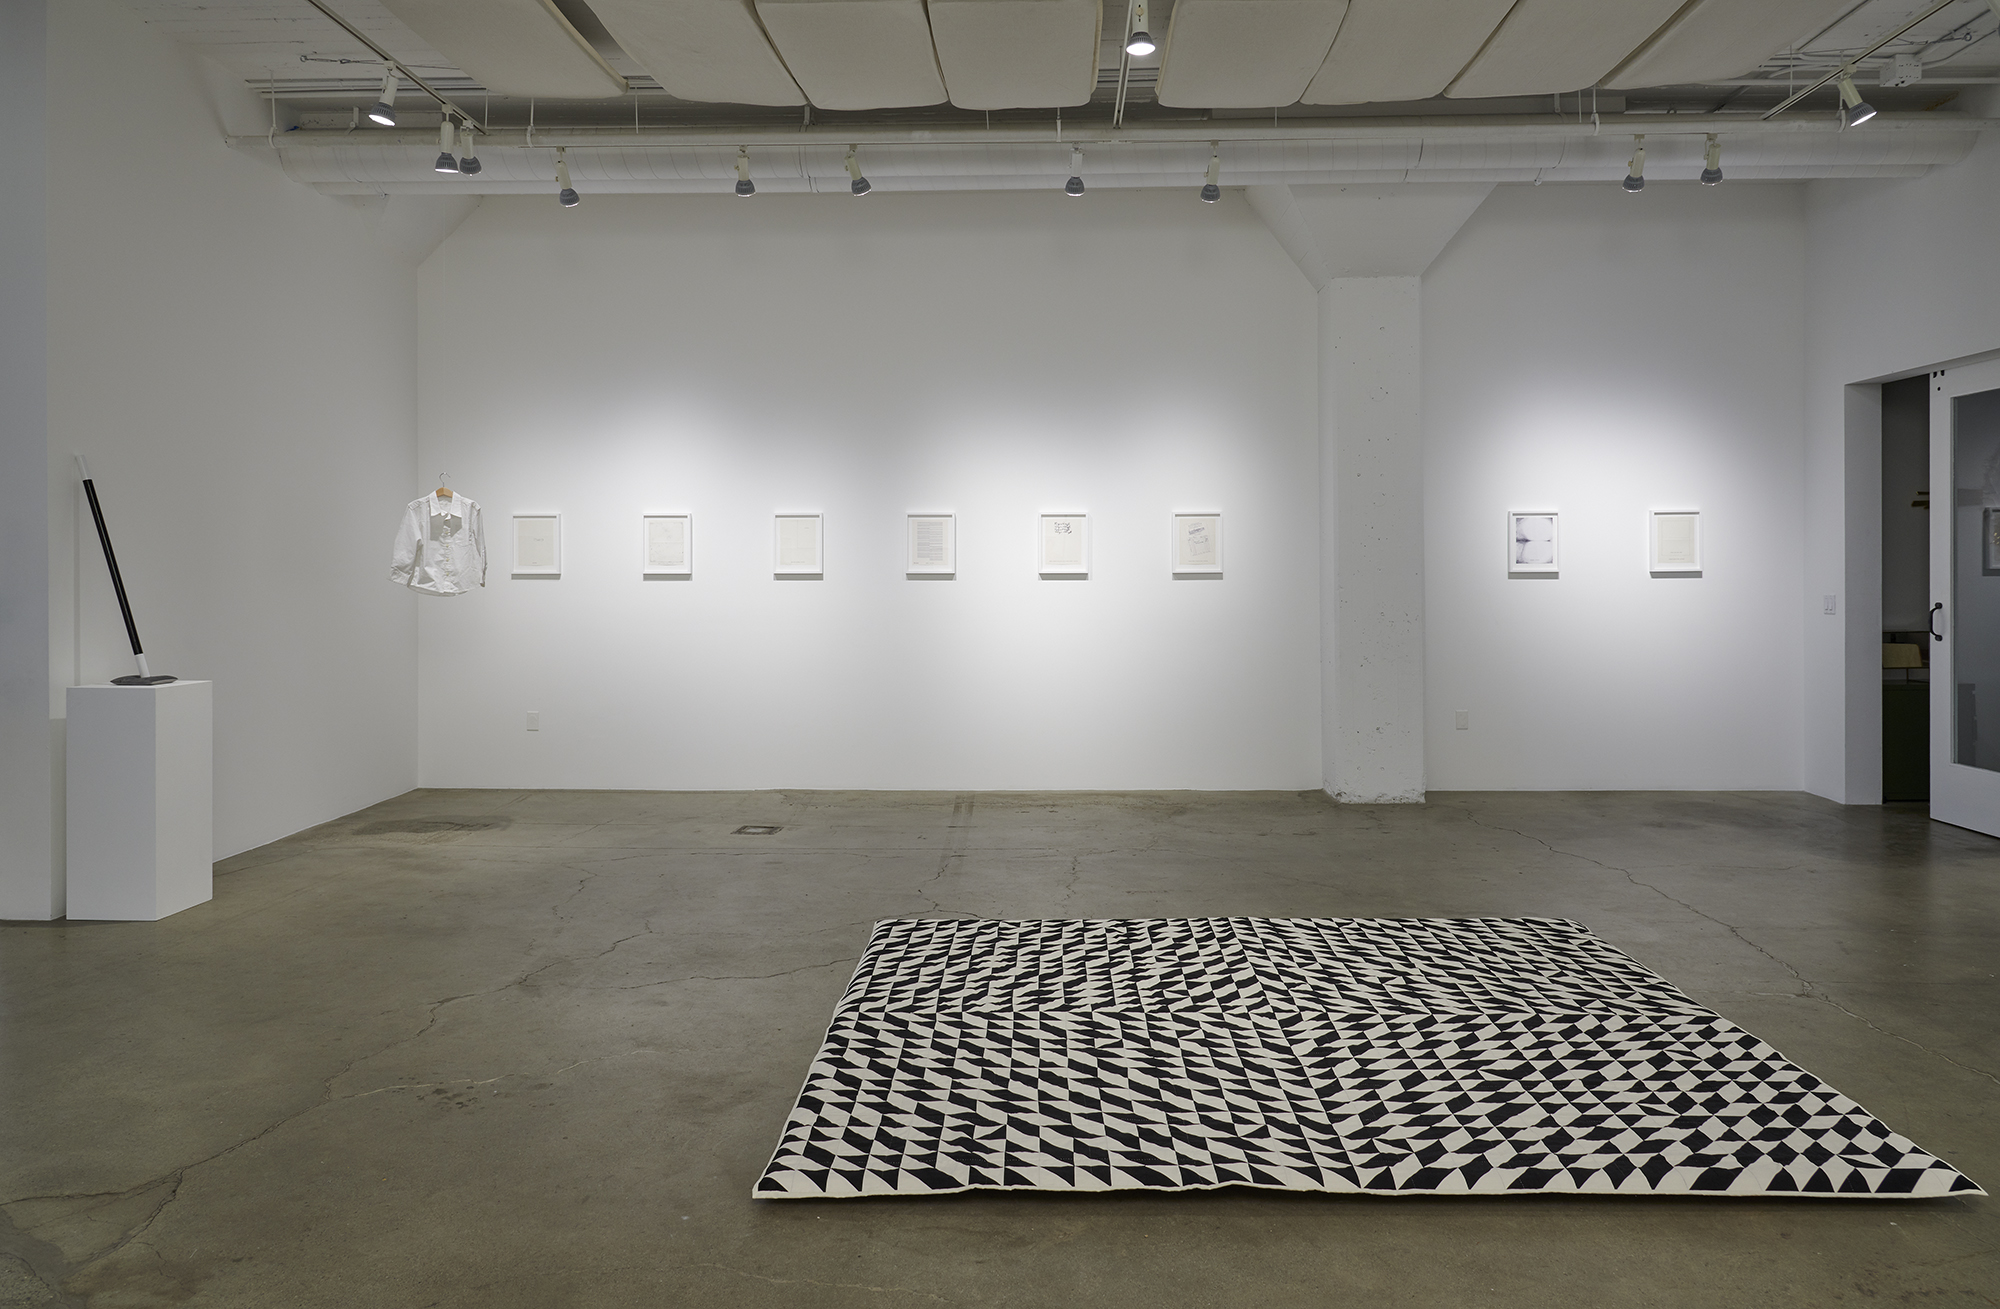  Installation view of solo show “Won, Too, Free, For”, Catharine Clark Gallery, SF, April - May 2019 